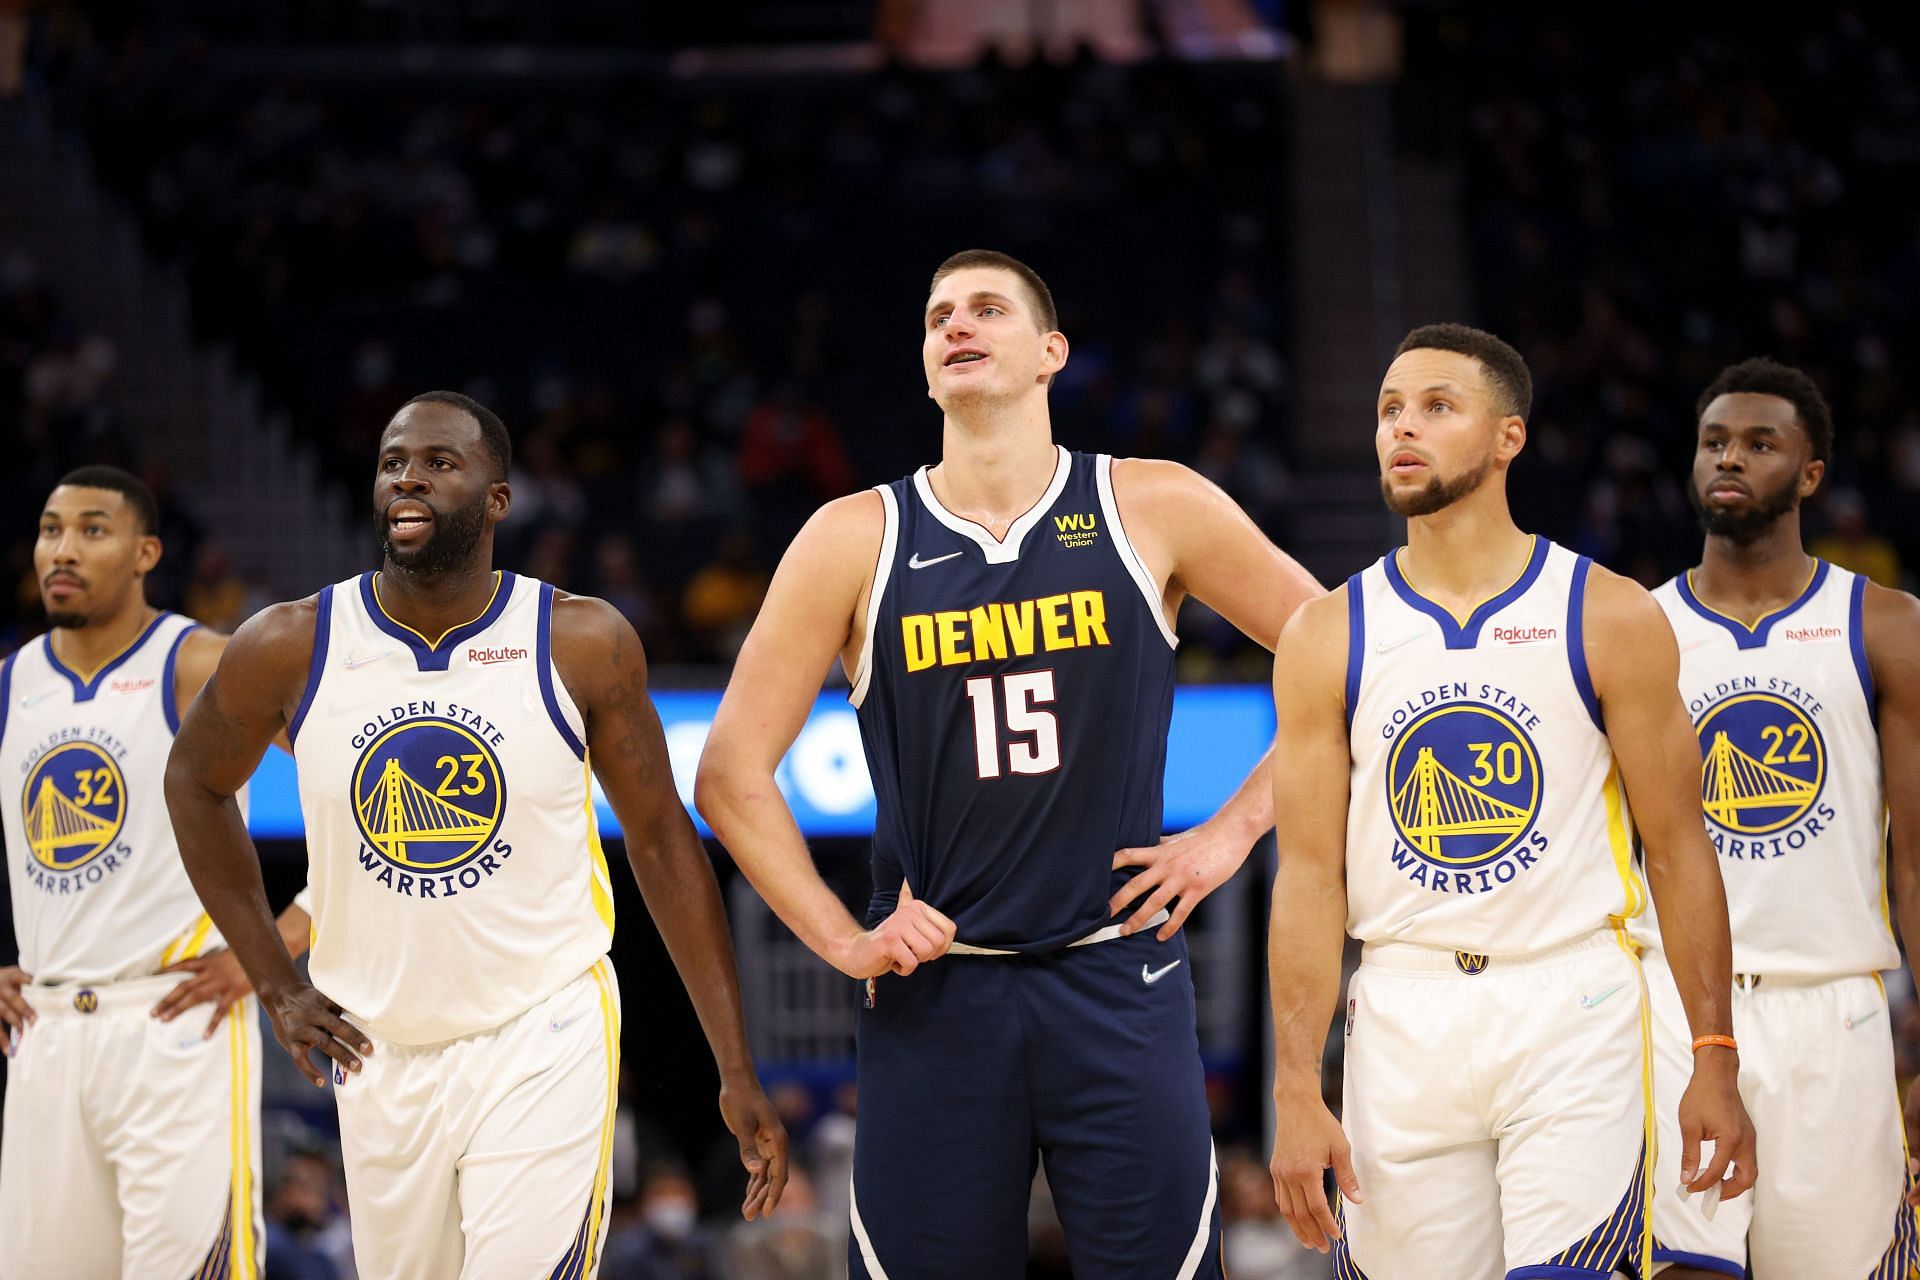 Nikola Jokic of the Denver Nuggets with (L-R) Otto Porter Jr., Draymond Green, Stephen Curry and Andrew Wiggins of the Golden State Warriors